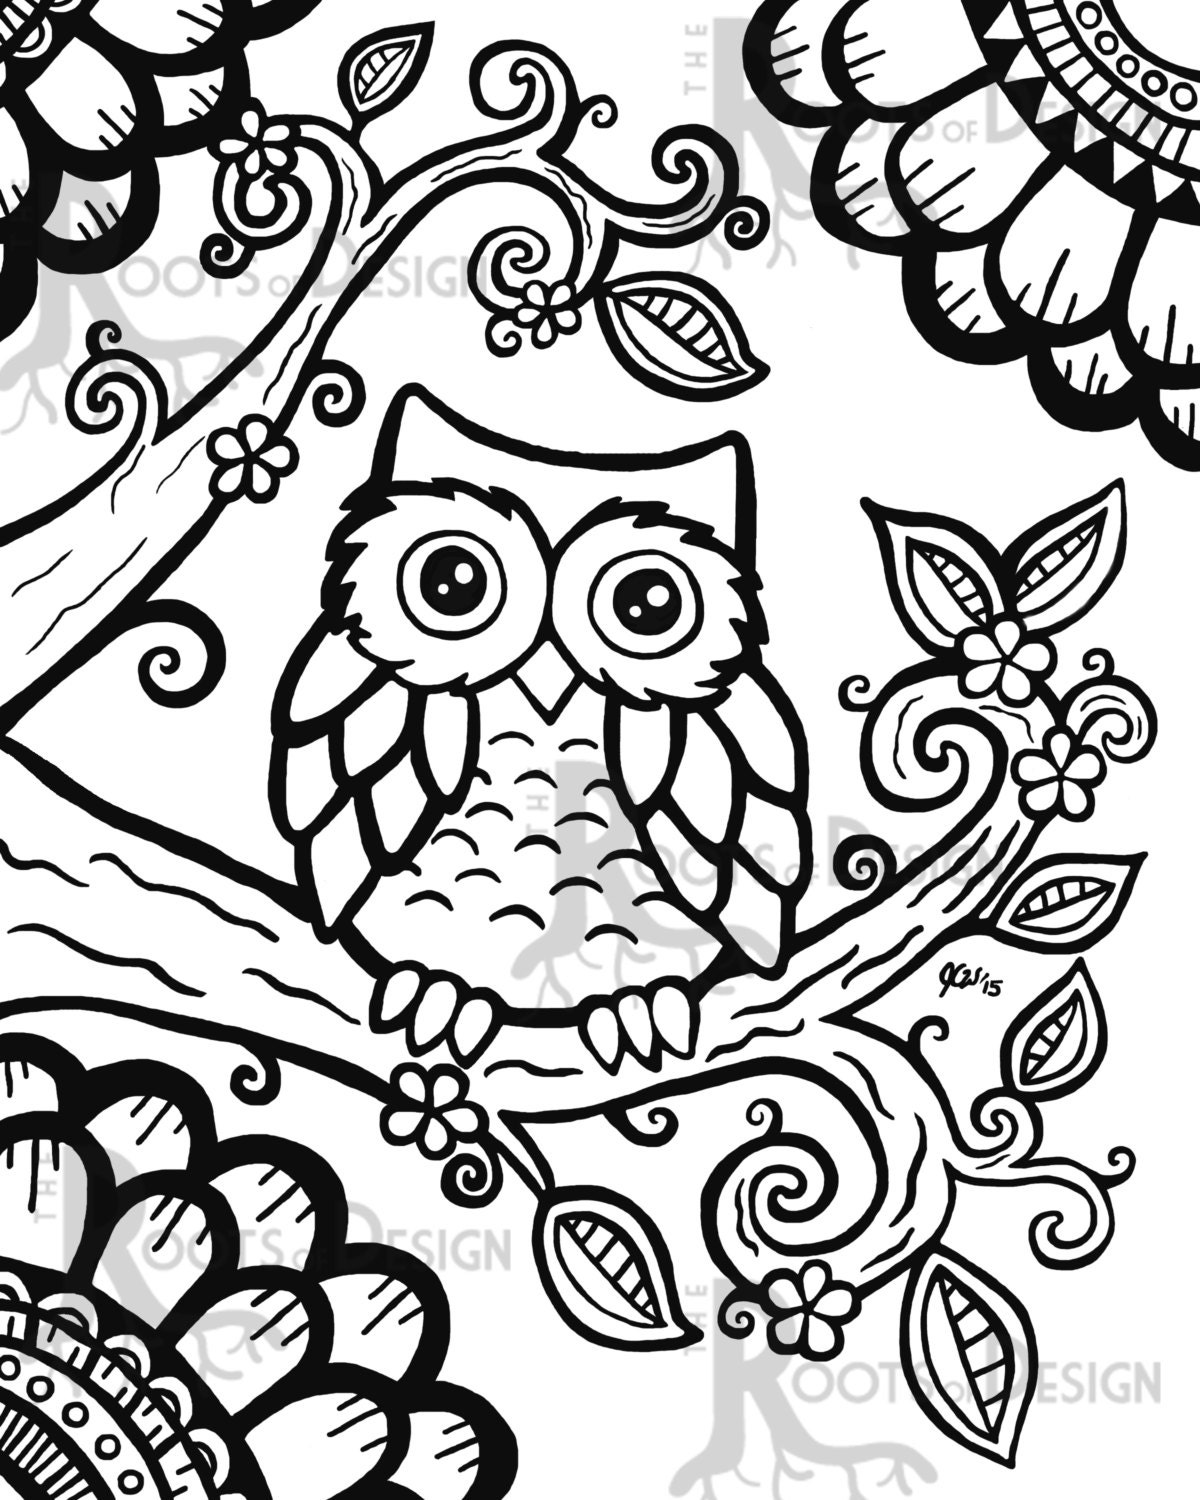 INSTANT DOWNLOAD Coloring Page Cute Owl zentangle by ...